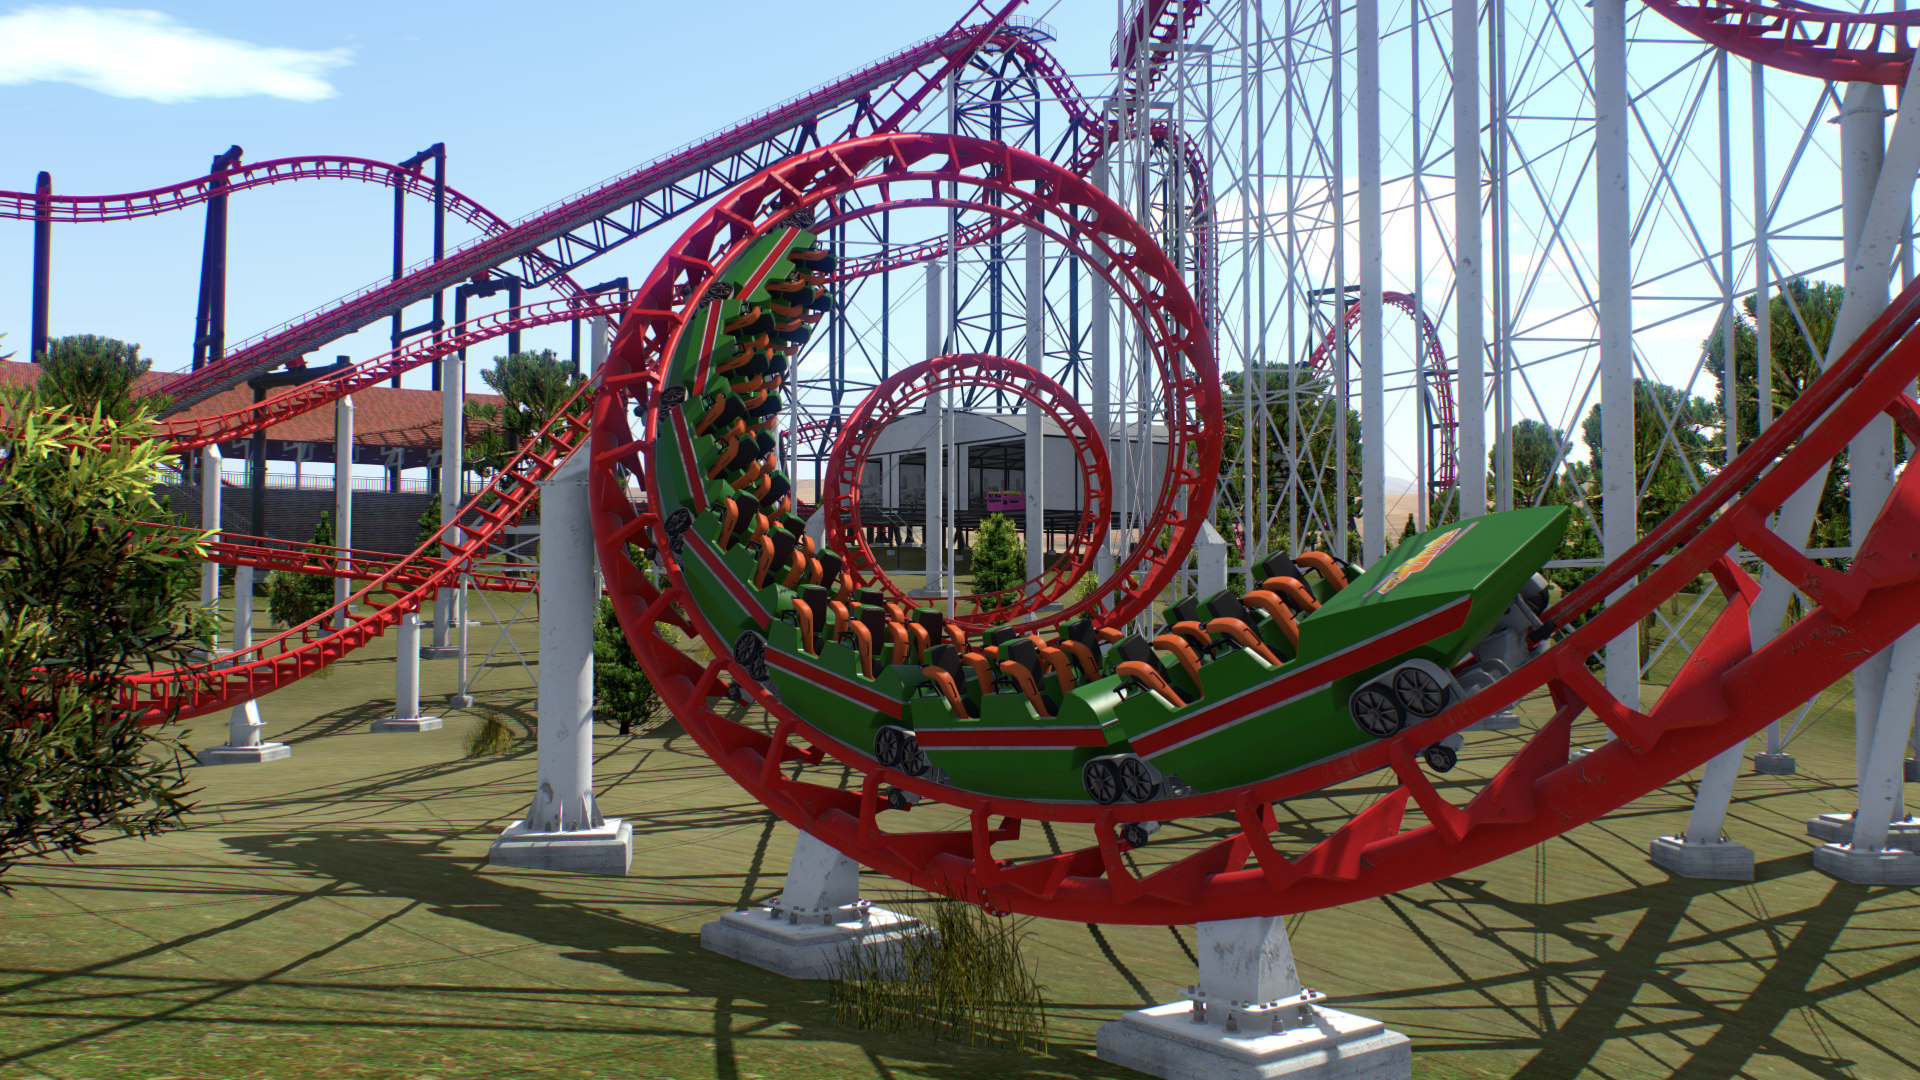 Find the best laptops for NoLimits 2 Roller Coaster Simulation